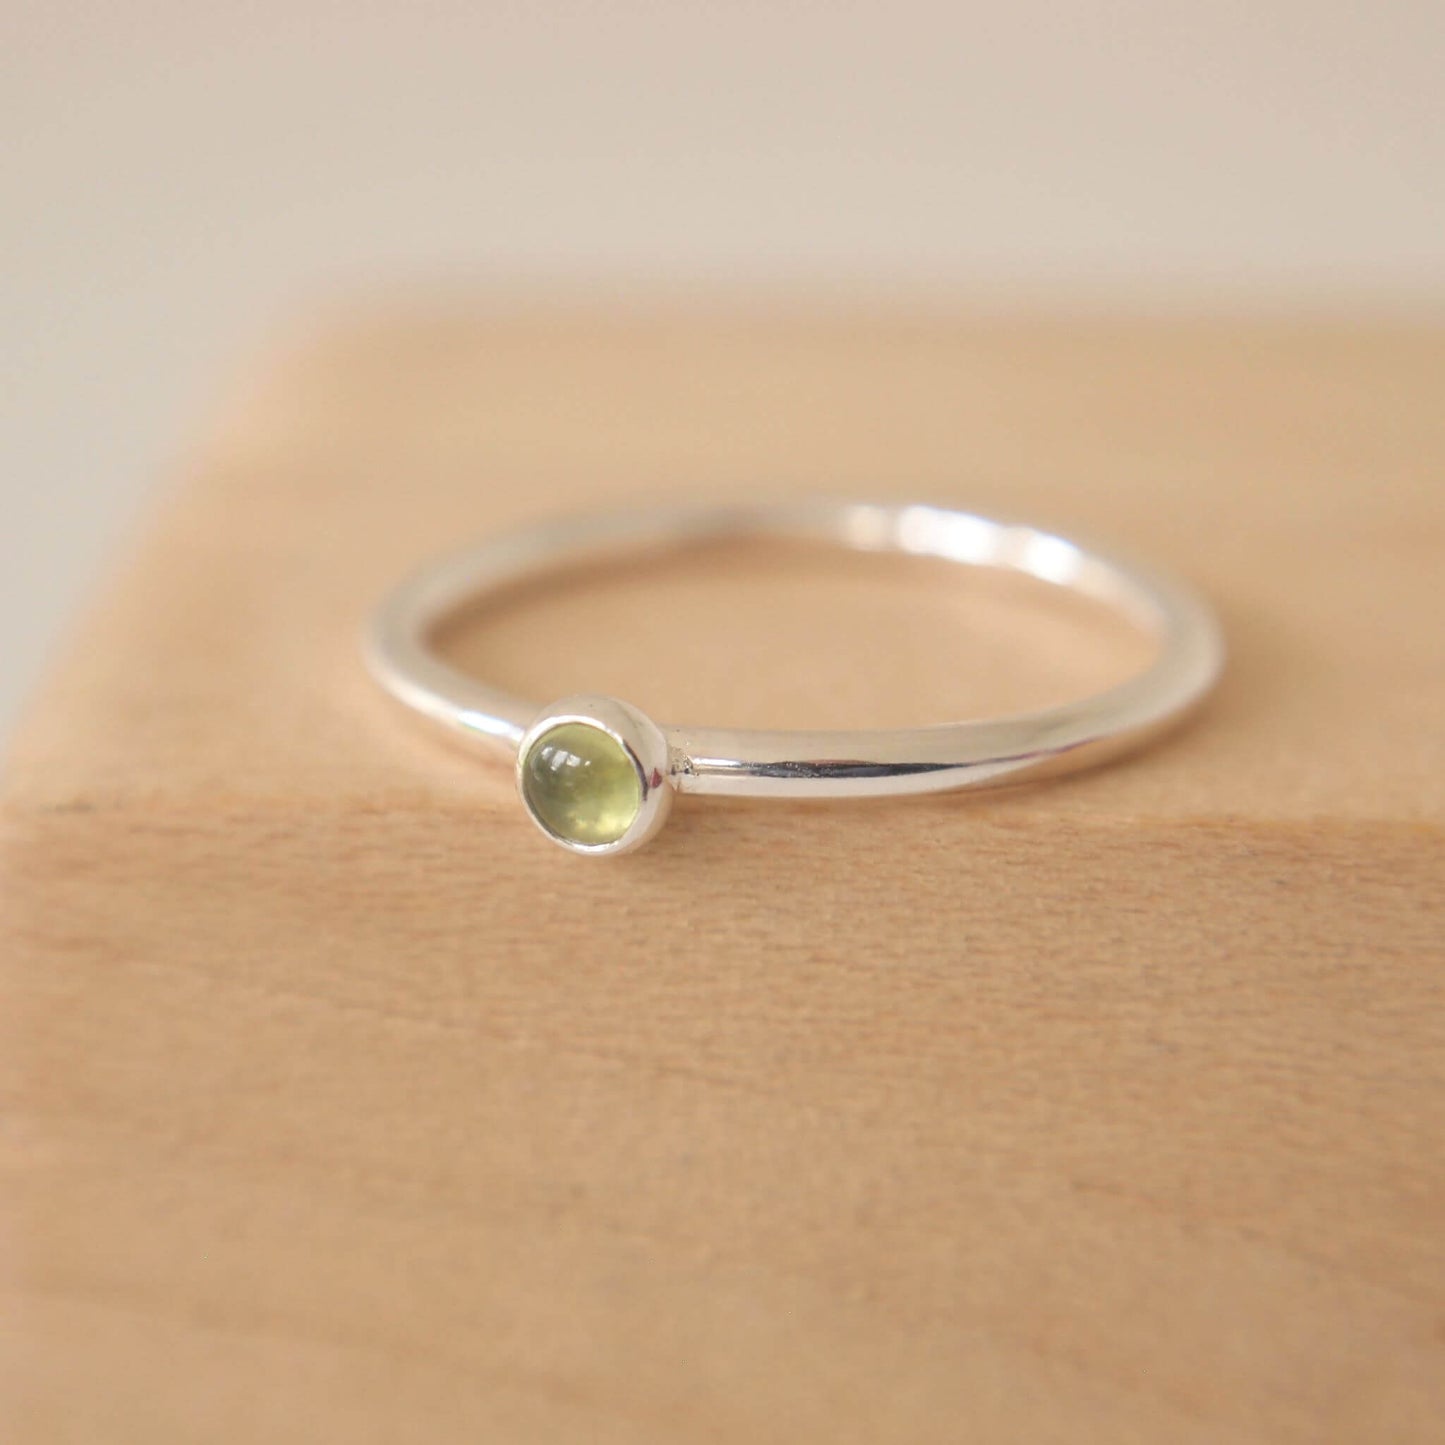 Peridot and Sterling Silver Ring made from a small 3mm round moss green Peridot gemstone set simply onto a modern band of round wire. Handmade to your ring size by maram jewellery in Scotland